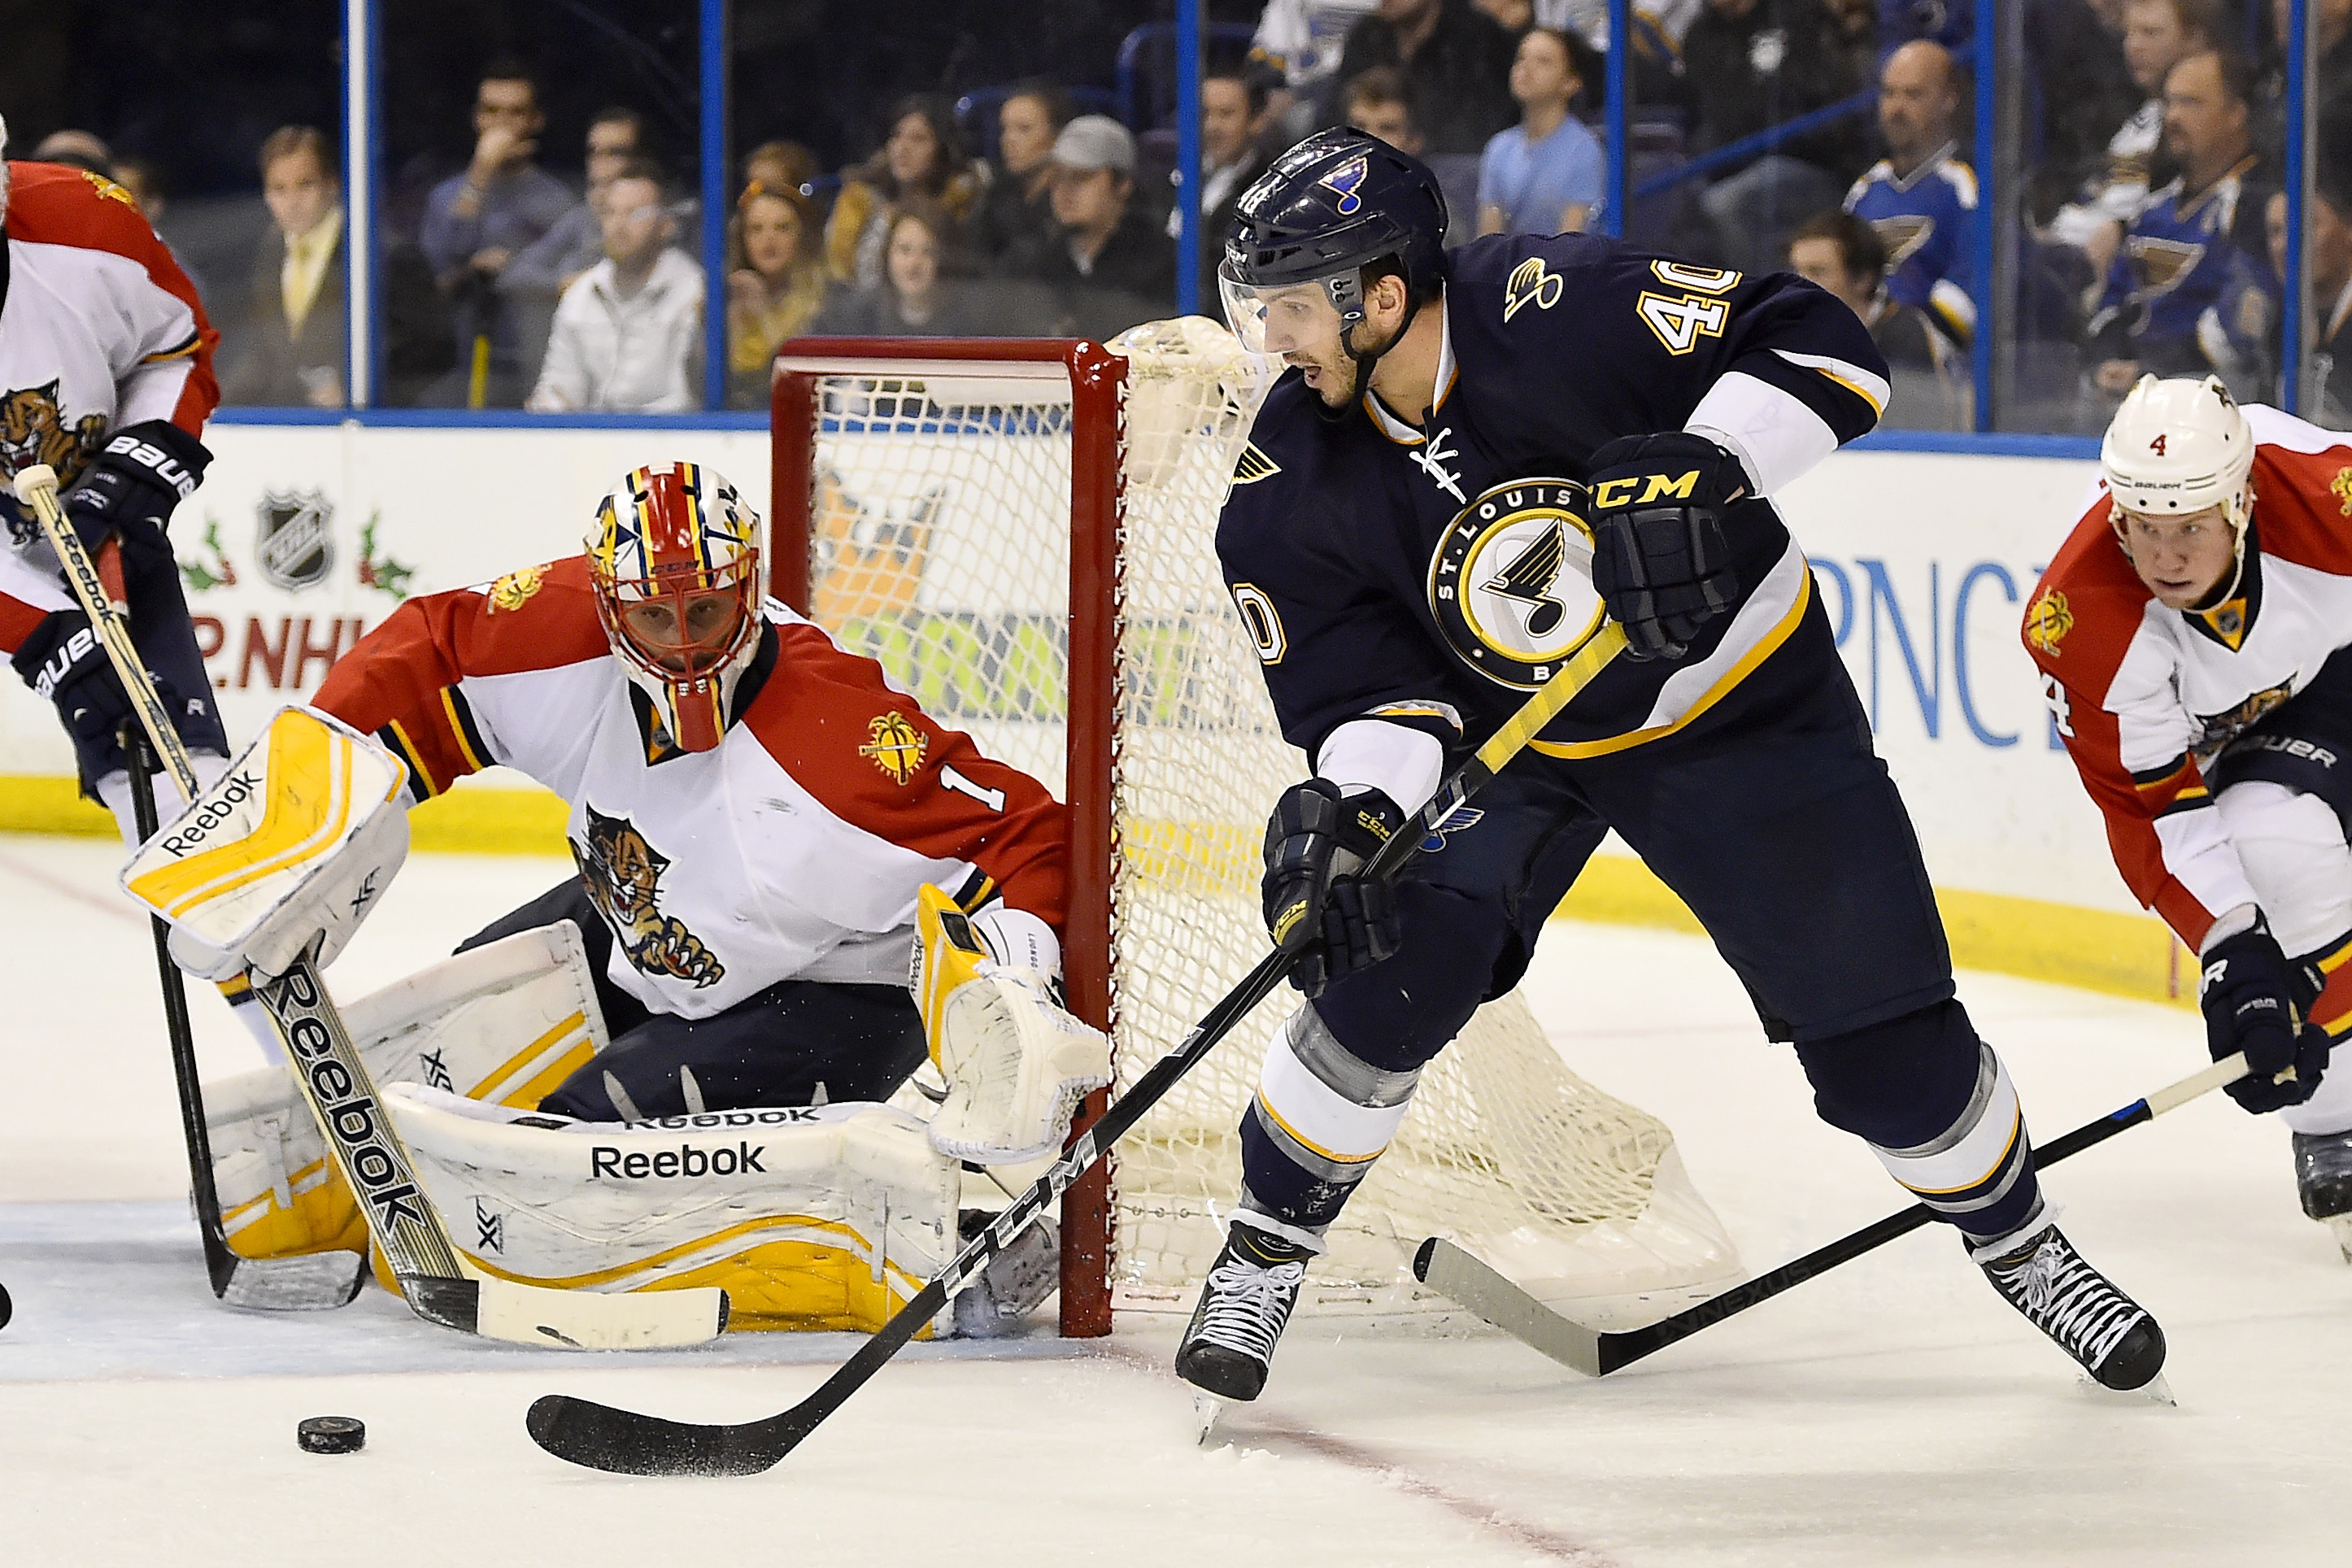 Maxim Lapierre was acquired from the Blues on Tuesday for Marcel Goc. ( Jasen Vinlove, USA TODAY Sports)